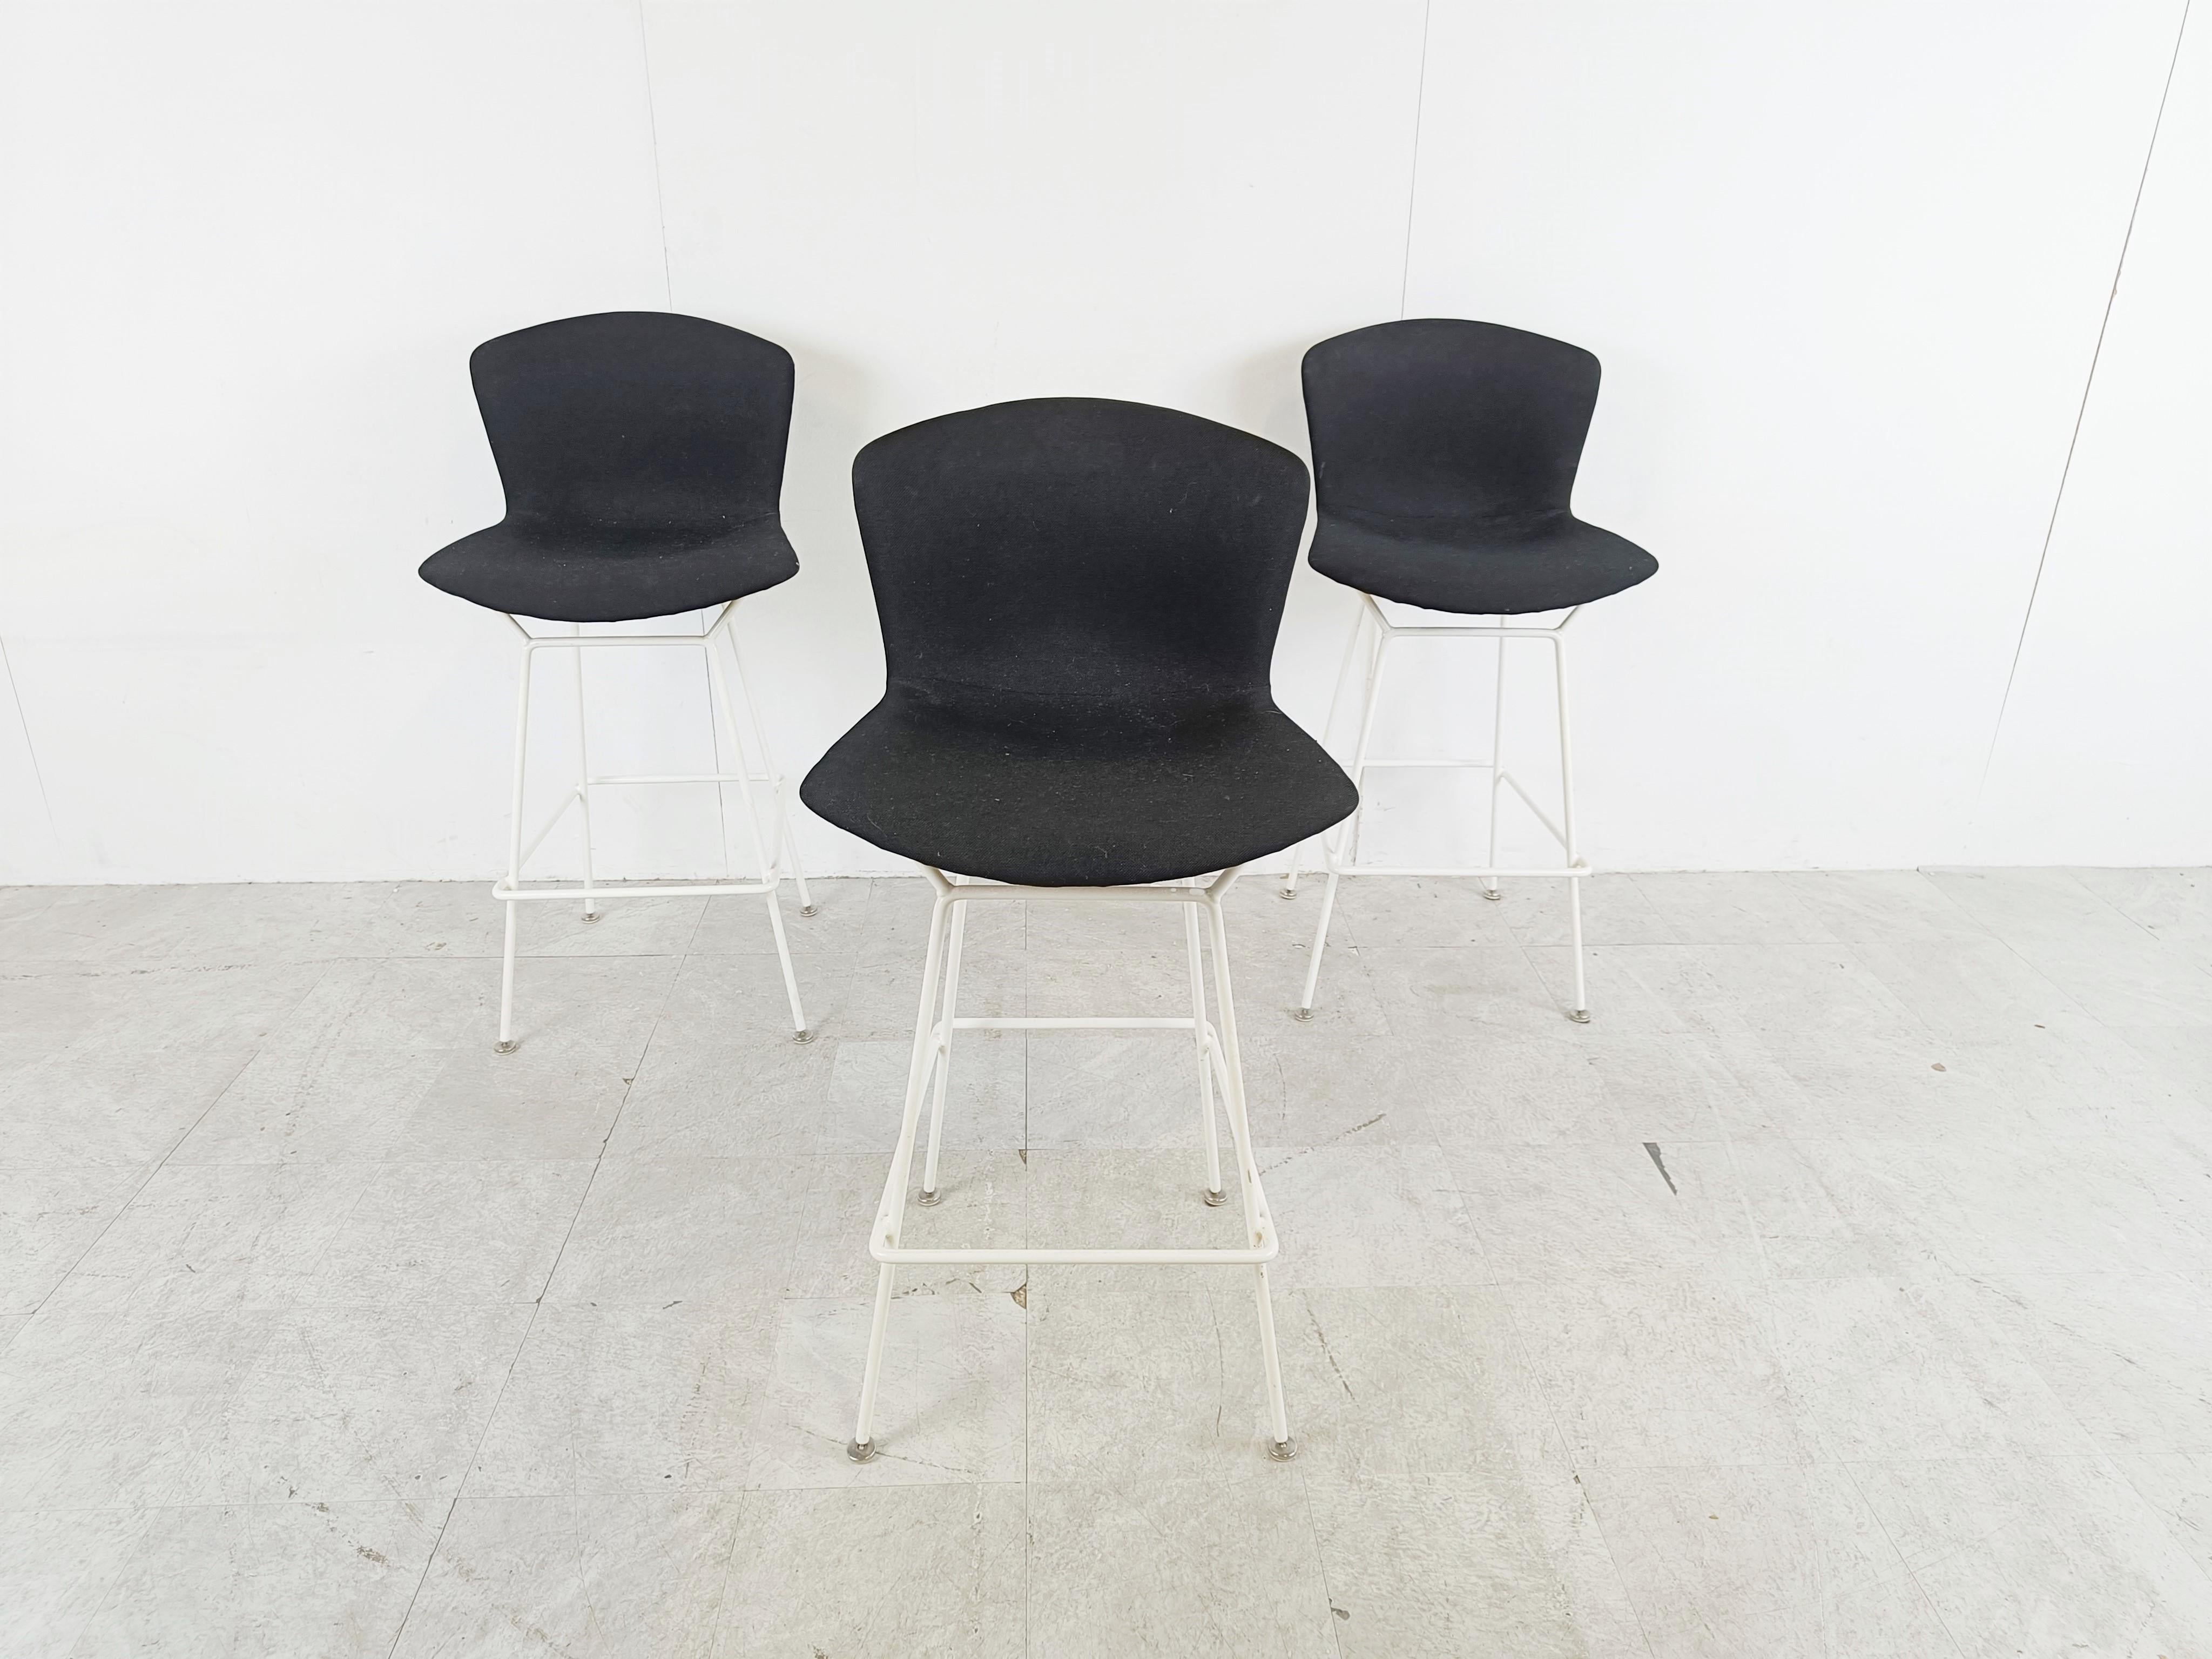 Vintage metal wire bar stools designed by Harry Bertoia in the 1950s.

The stools have a white lacquered metal frame and black fabric covers. They can also be used without the fabric covers.

Good condition.

Dimensions:
Height: 108cm/42.51